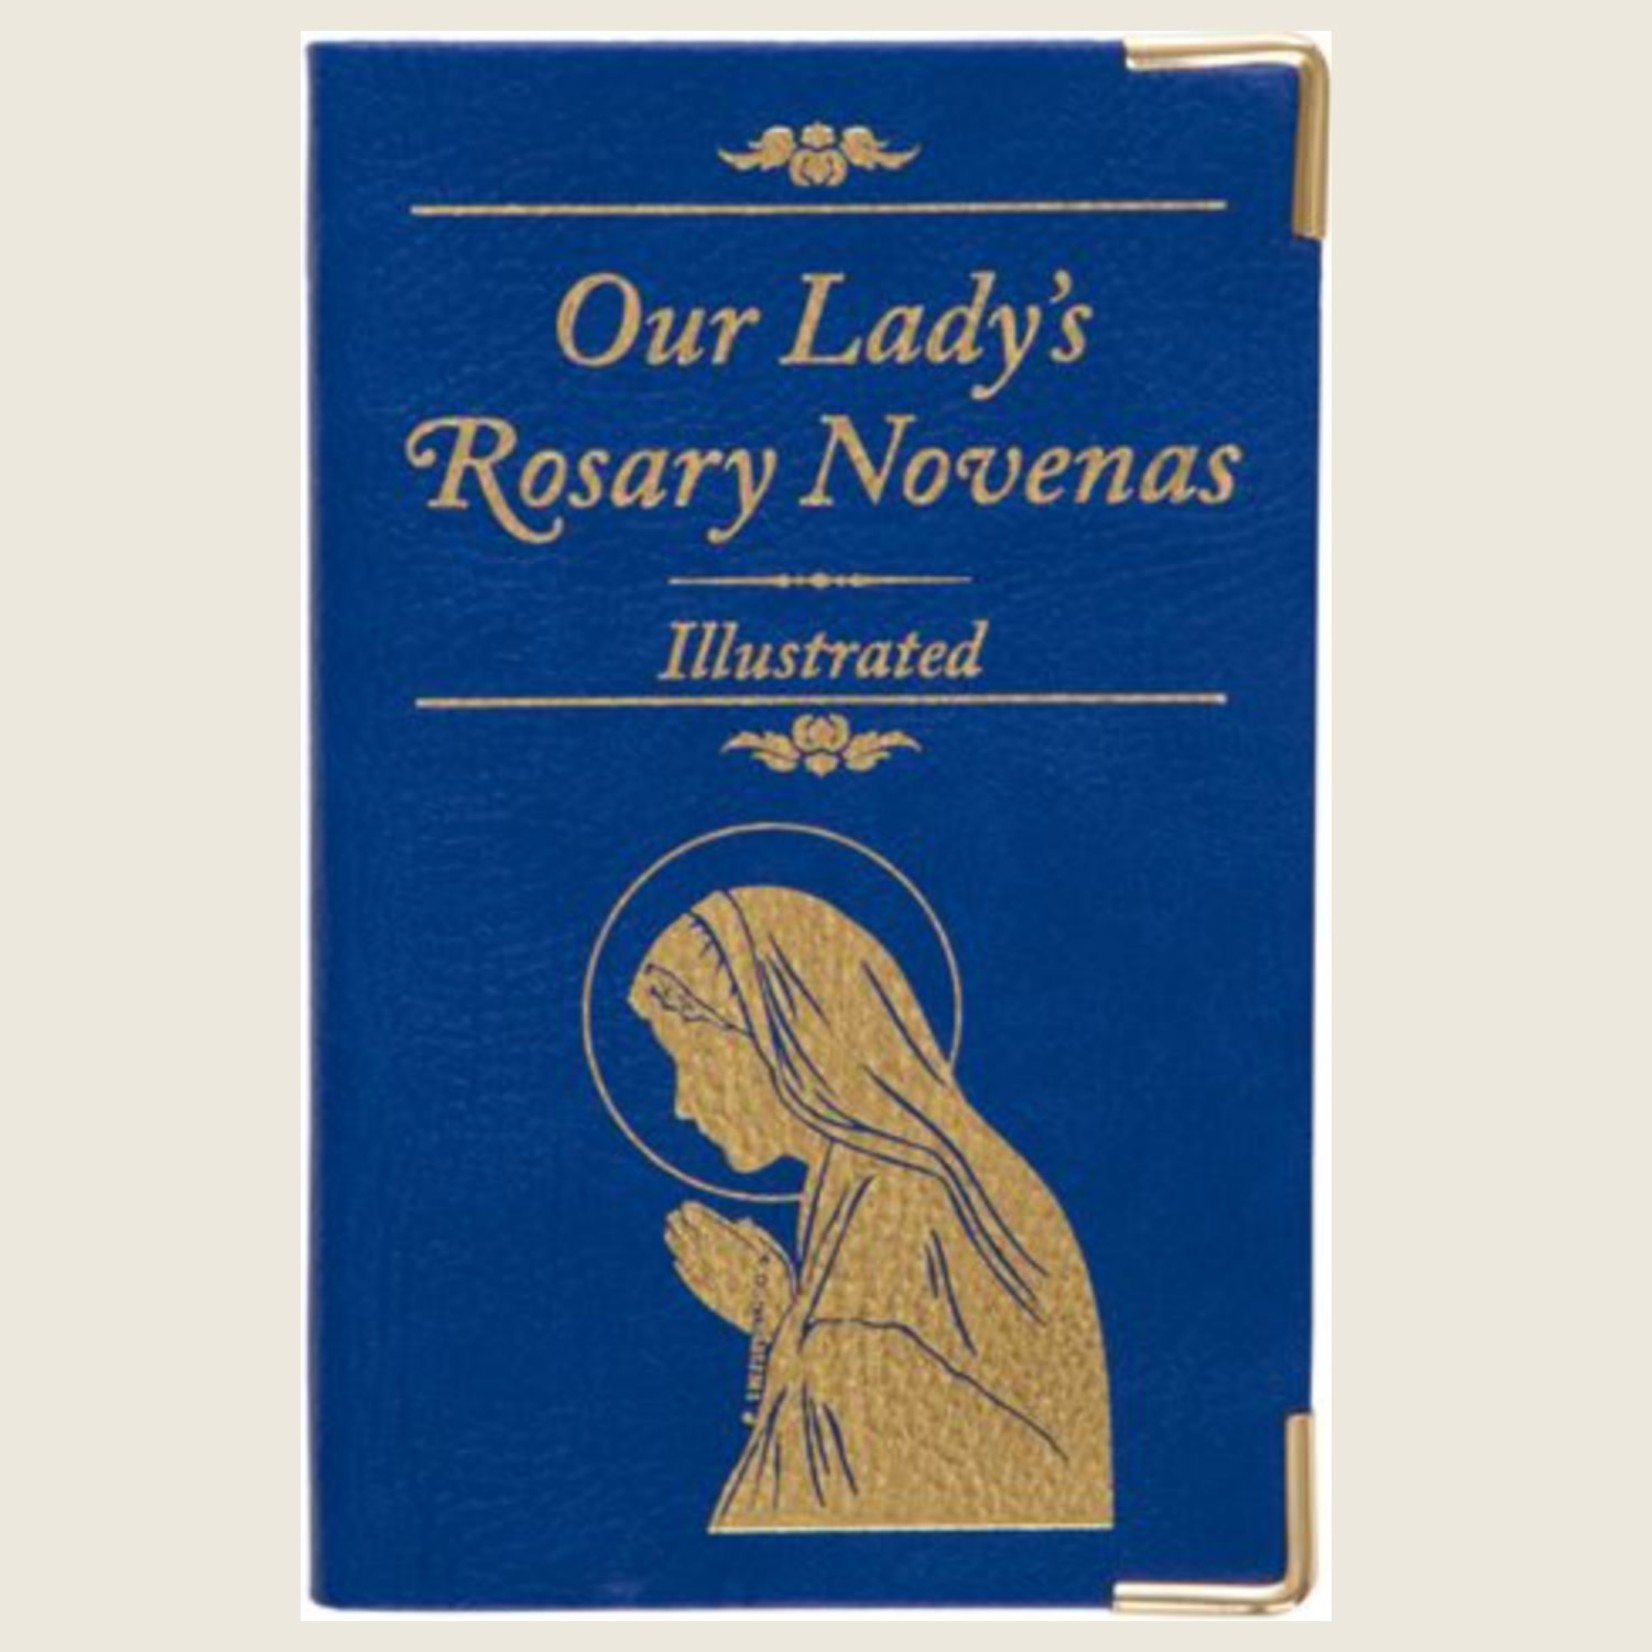 Our Lady's Rosary Novenas (Illustrated)